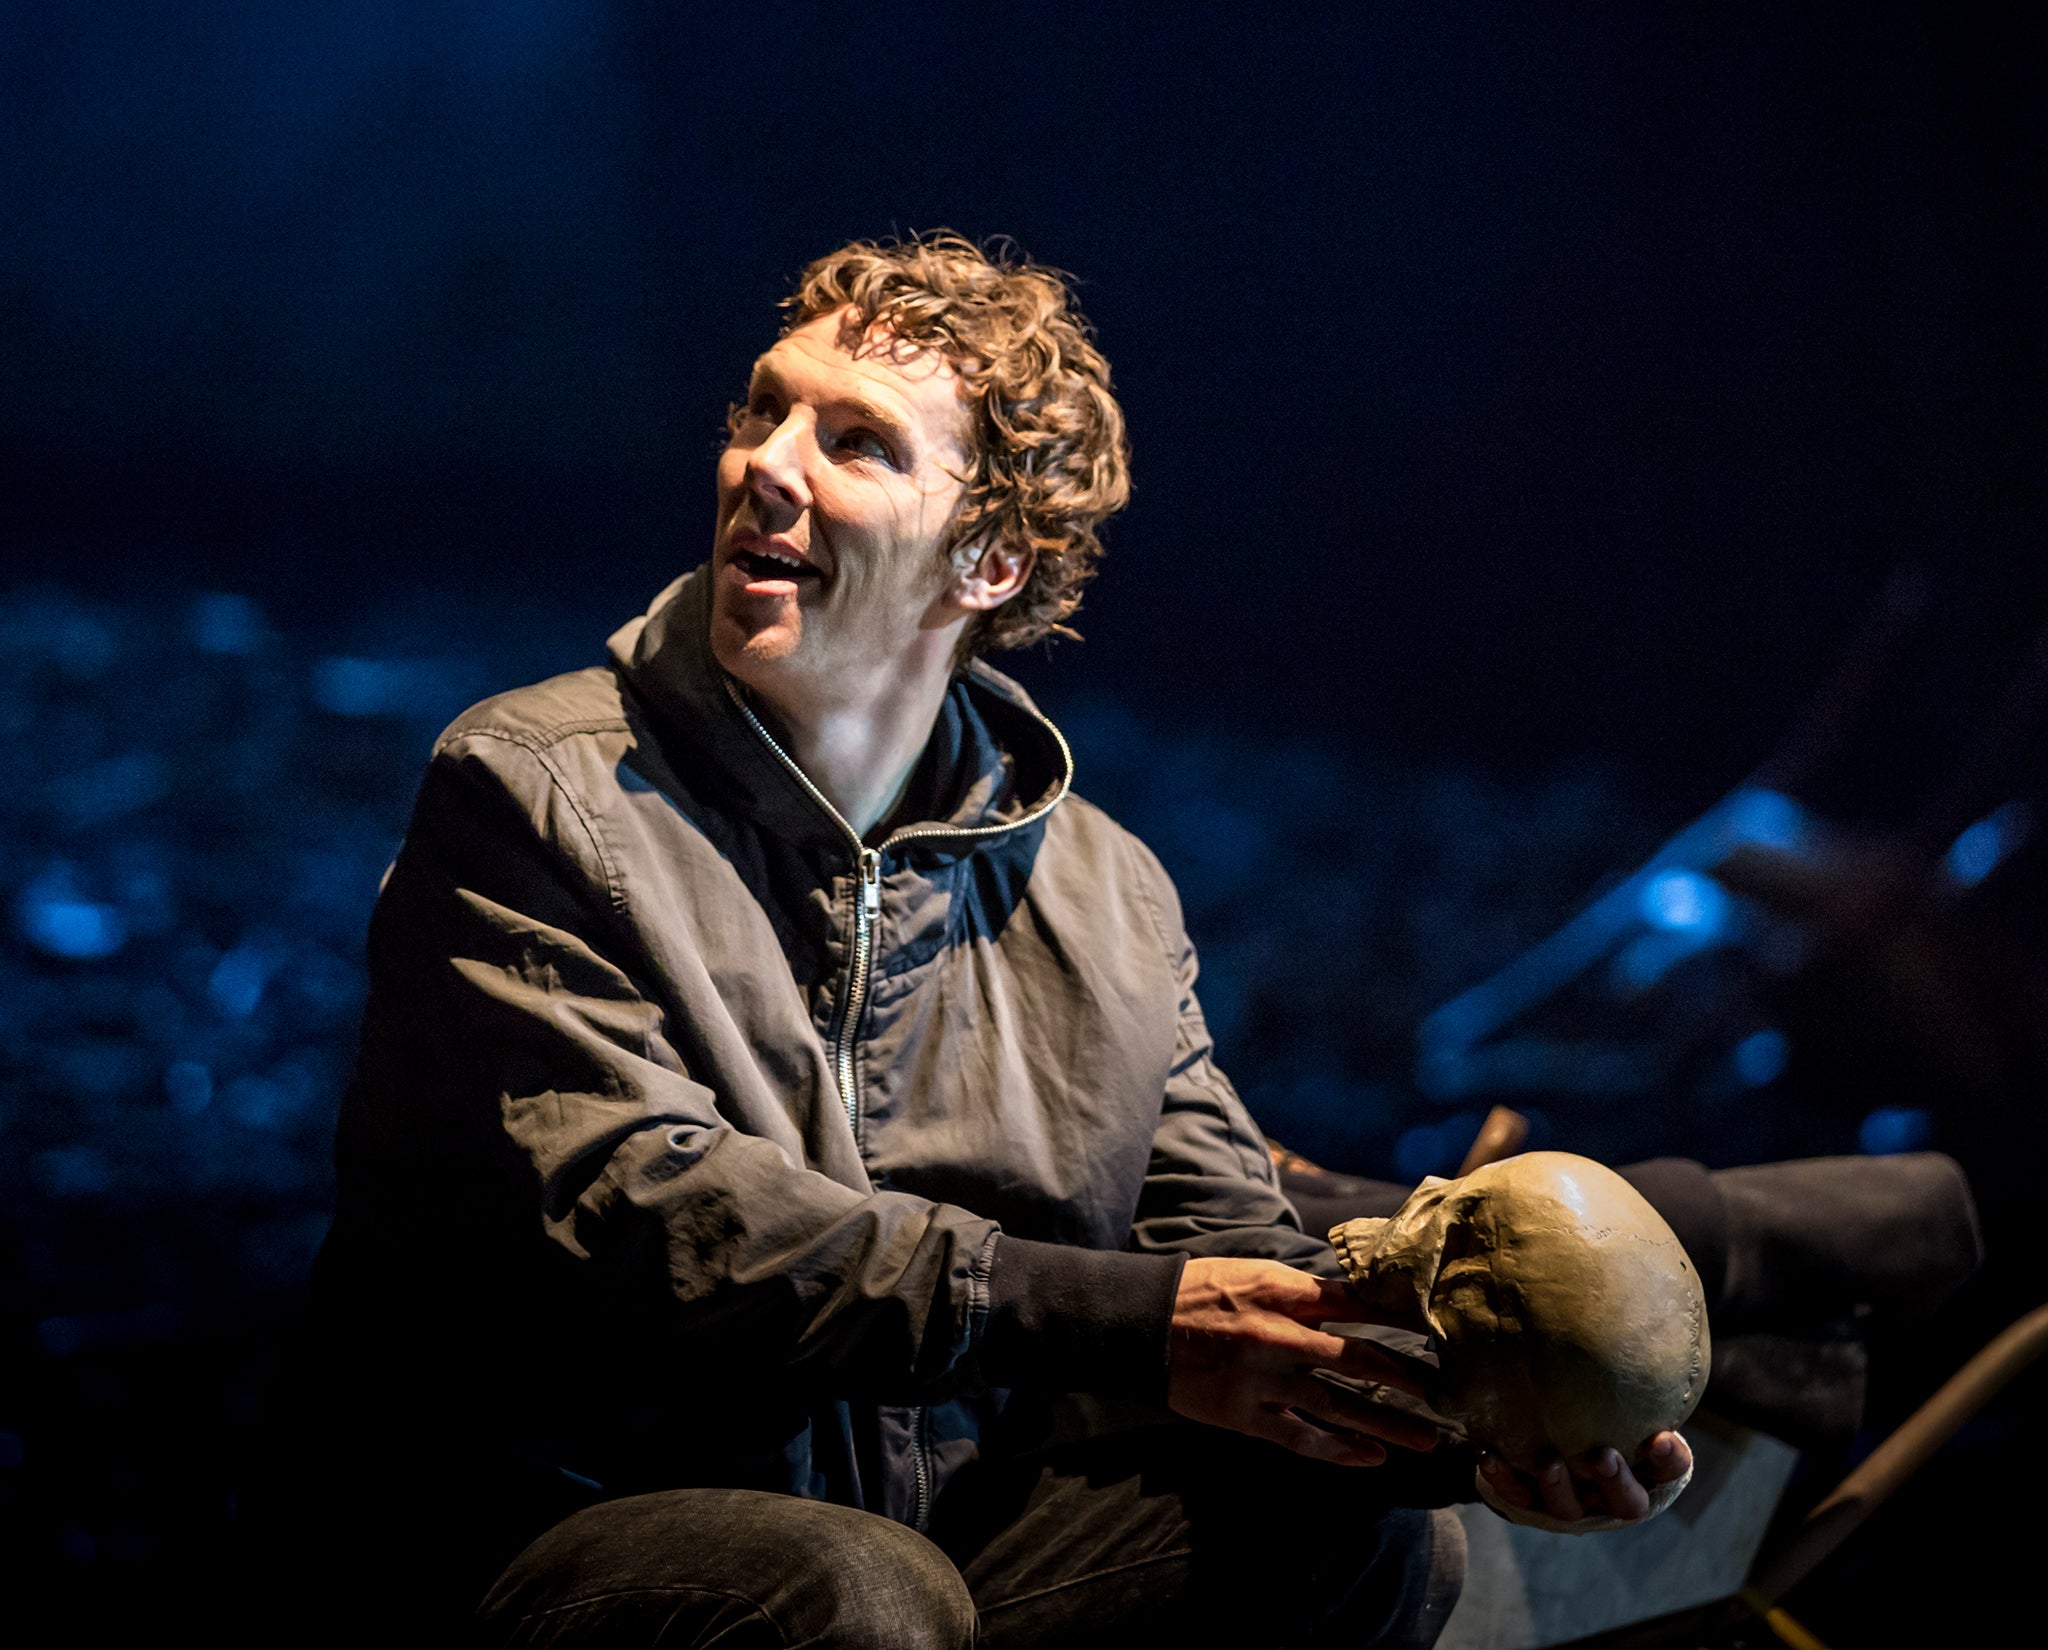 When Benedict Cumberbatch starred in 'Hamlet' at the Barbican he asked his fans at the stage door to stop photographing him and filming his performance on their mobiles